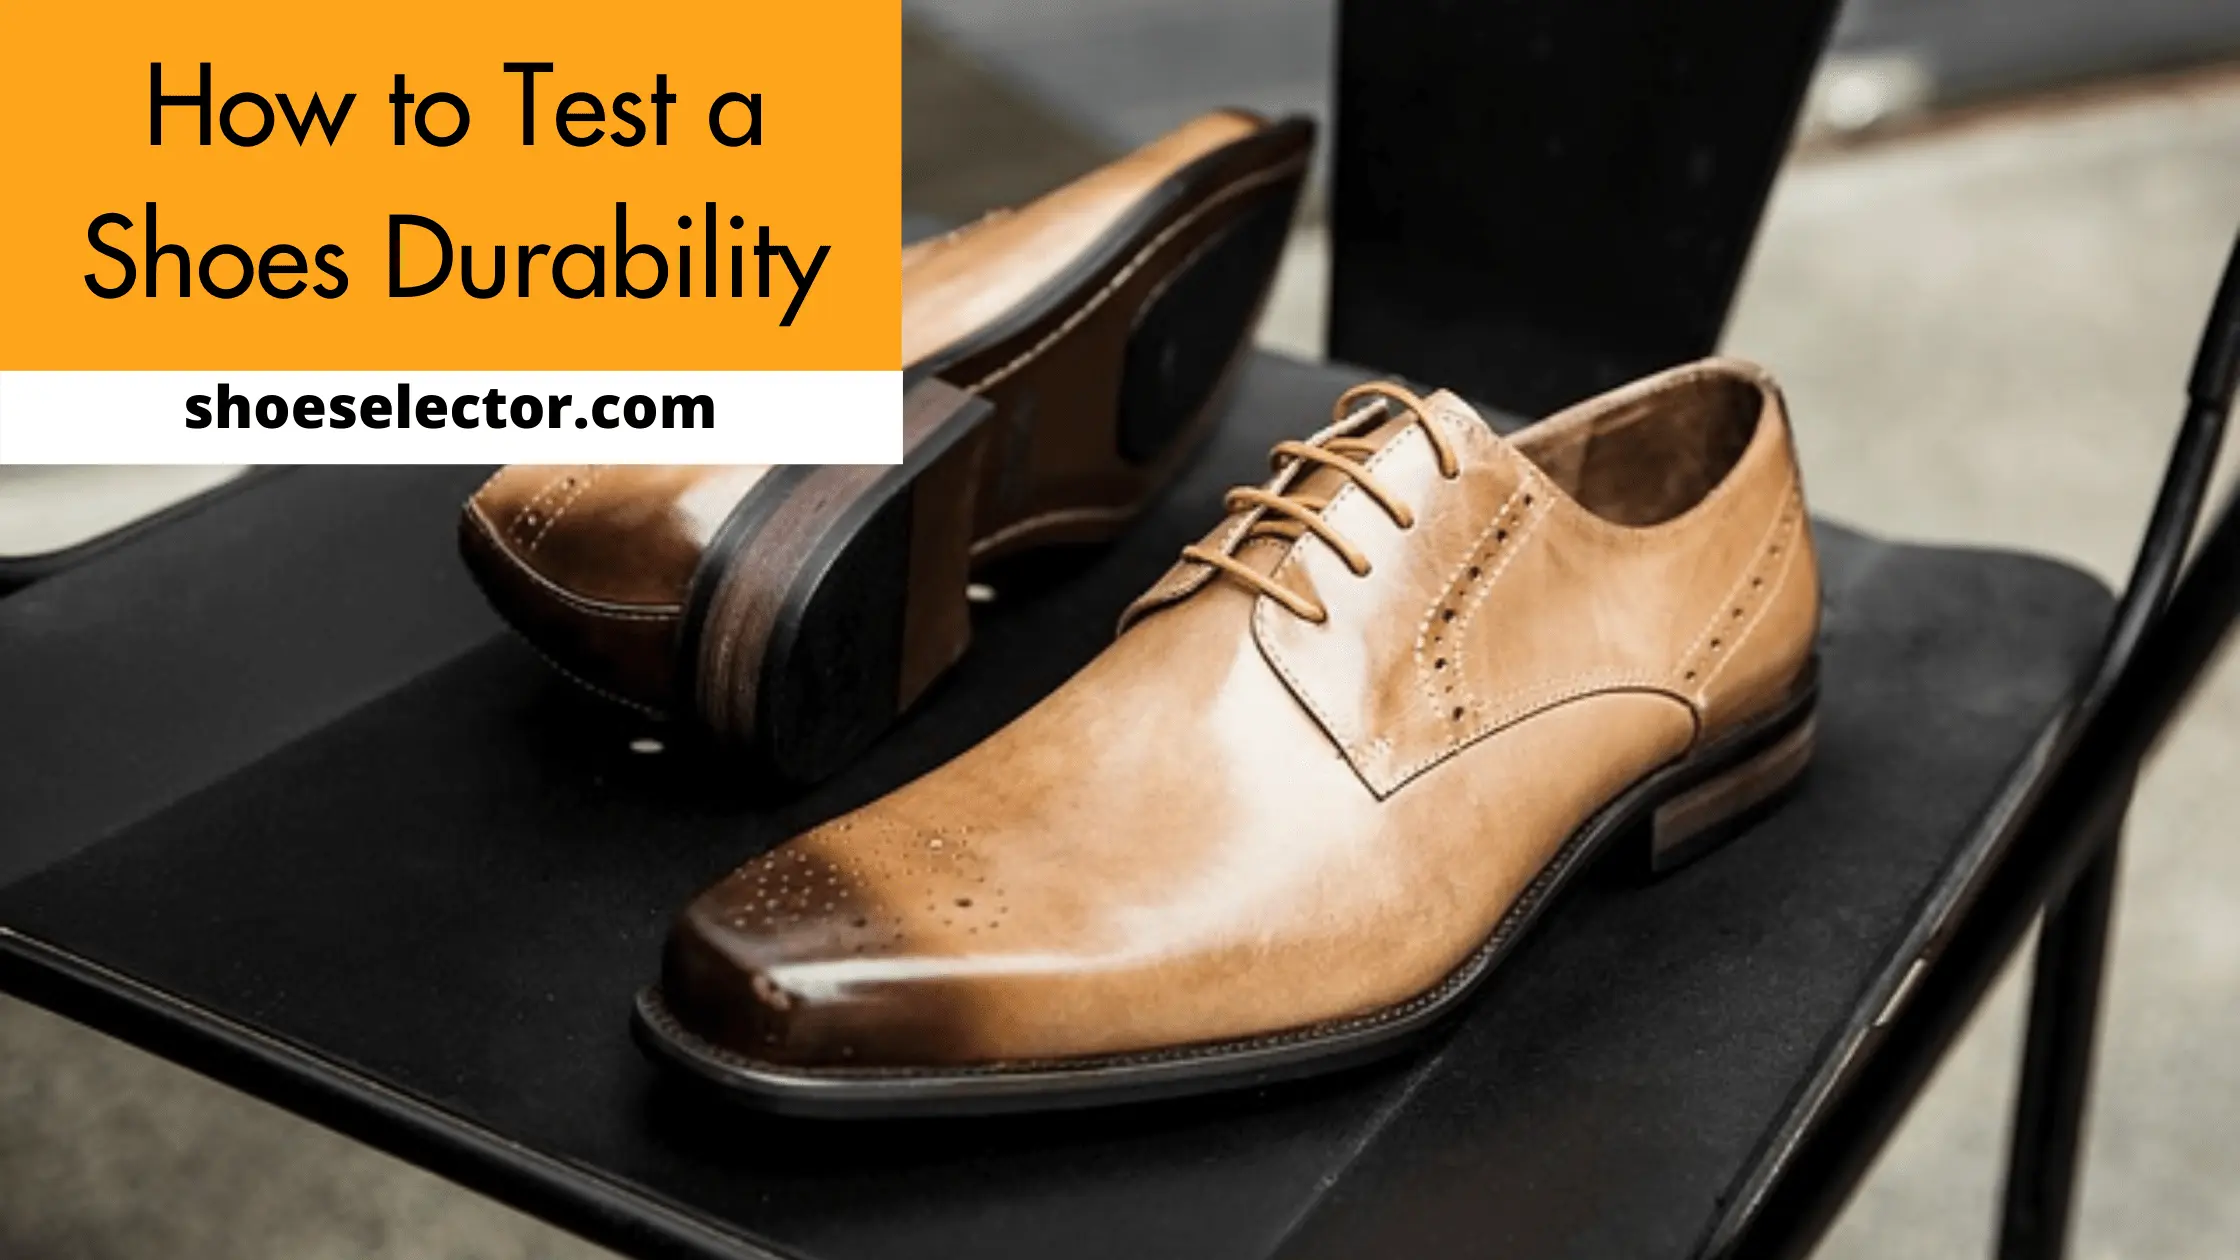 How to Test a Shoes Durability? - Complete Guide